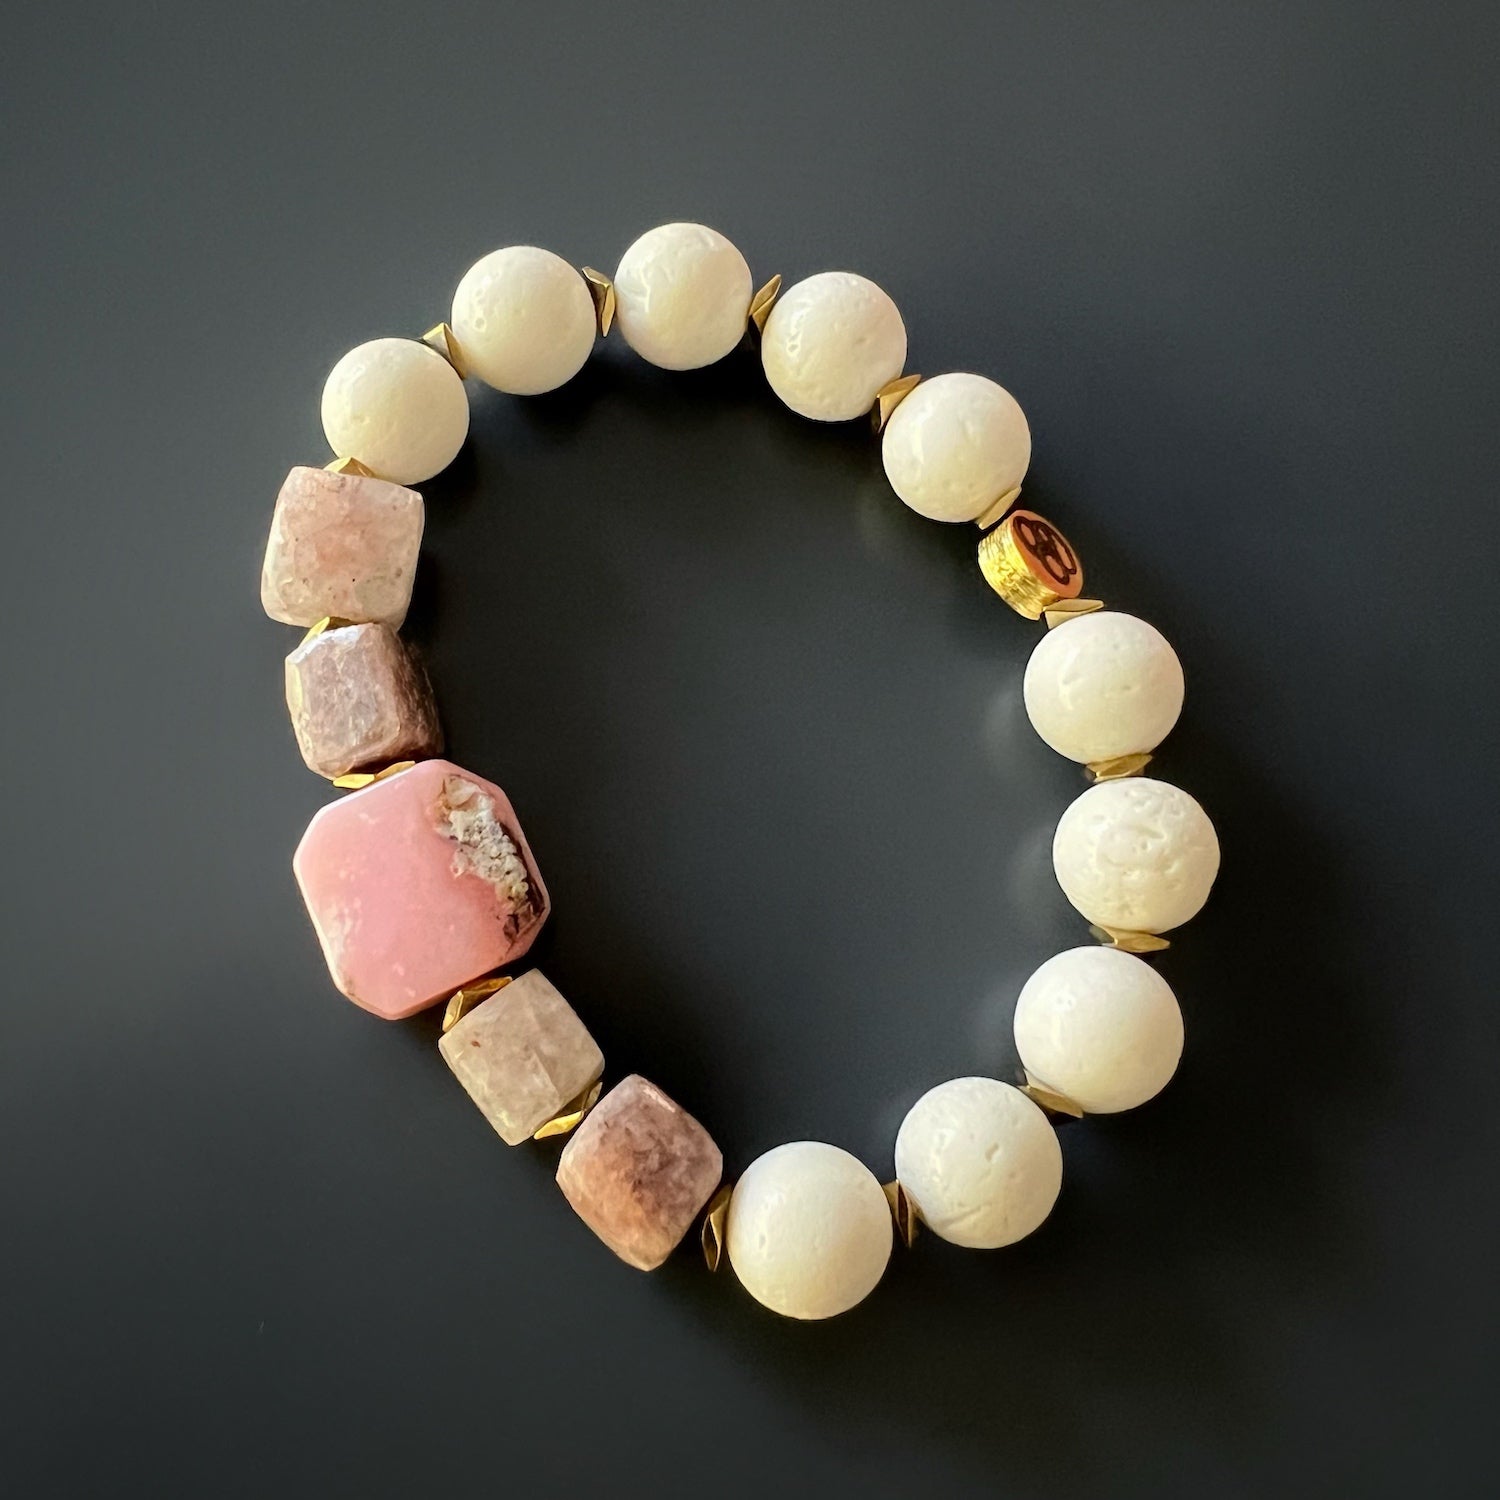 Discover the beauty and uniqueness of the Pink Quartz Balance Bracelet, a one-of-a-kind piece designed to enhance your well-being.